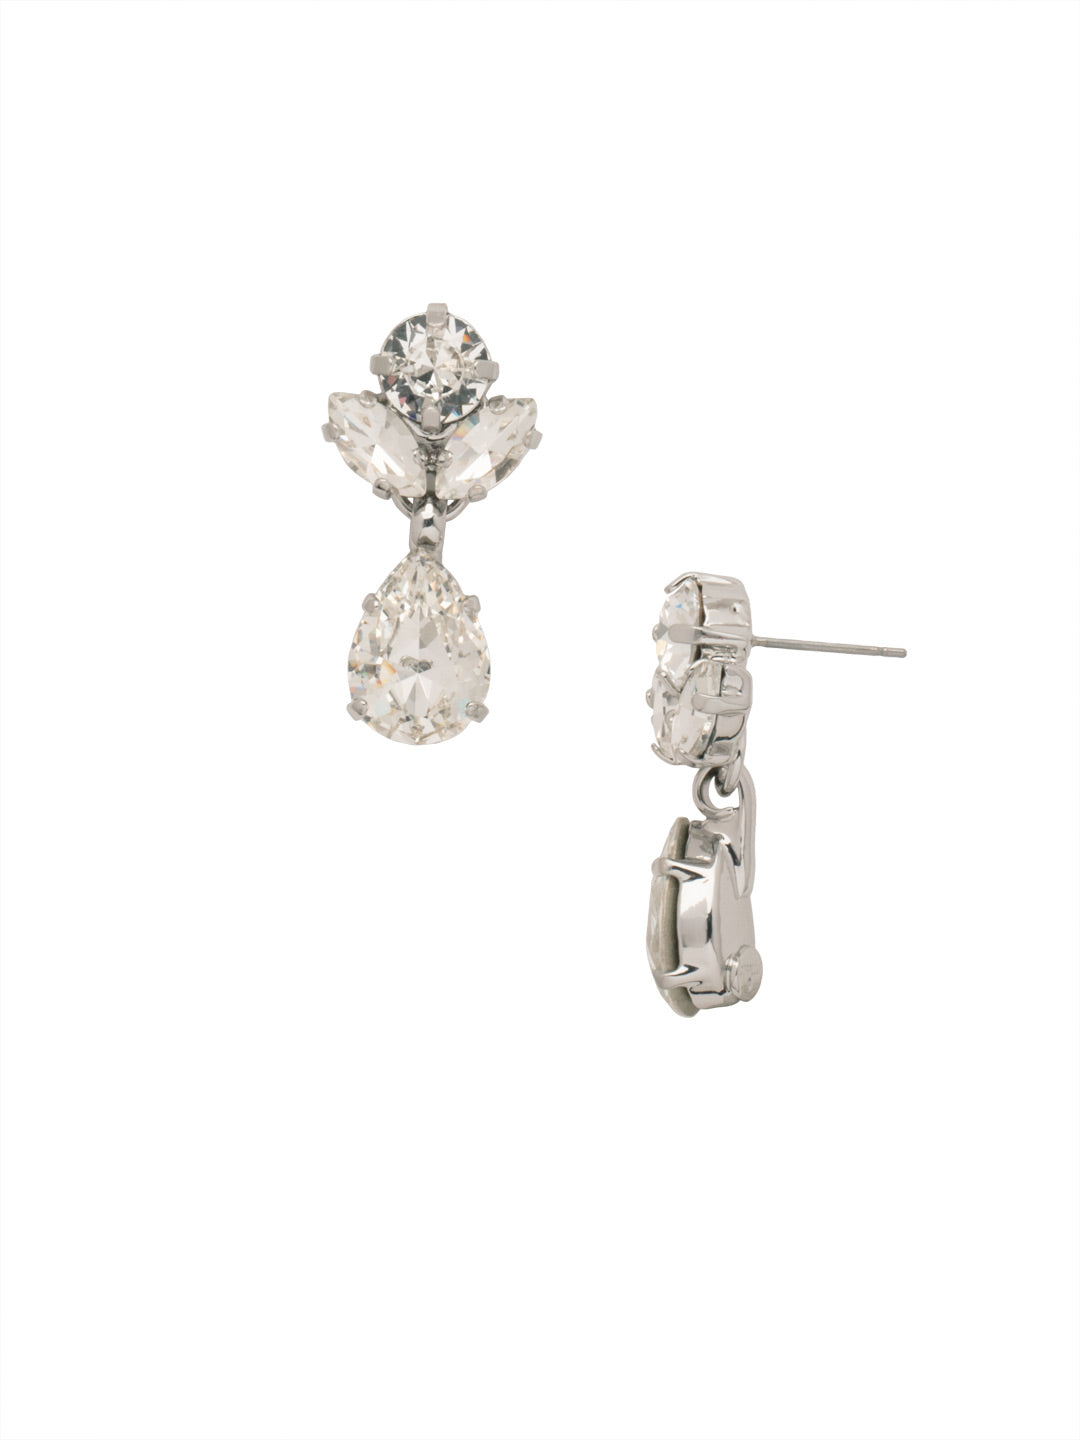 Romy Dangle Earrings - EFH13PDCRY - <p>The Romy Dangle Earrings are a stunning display of cut crystals. Pear, navette, and round cut crystals blend beautifully, creating the perfect pair of occasion earrings. From Sorrelli's Crystal collection in our Palladium finish.</p>